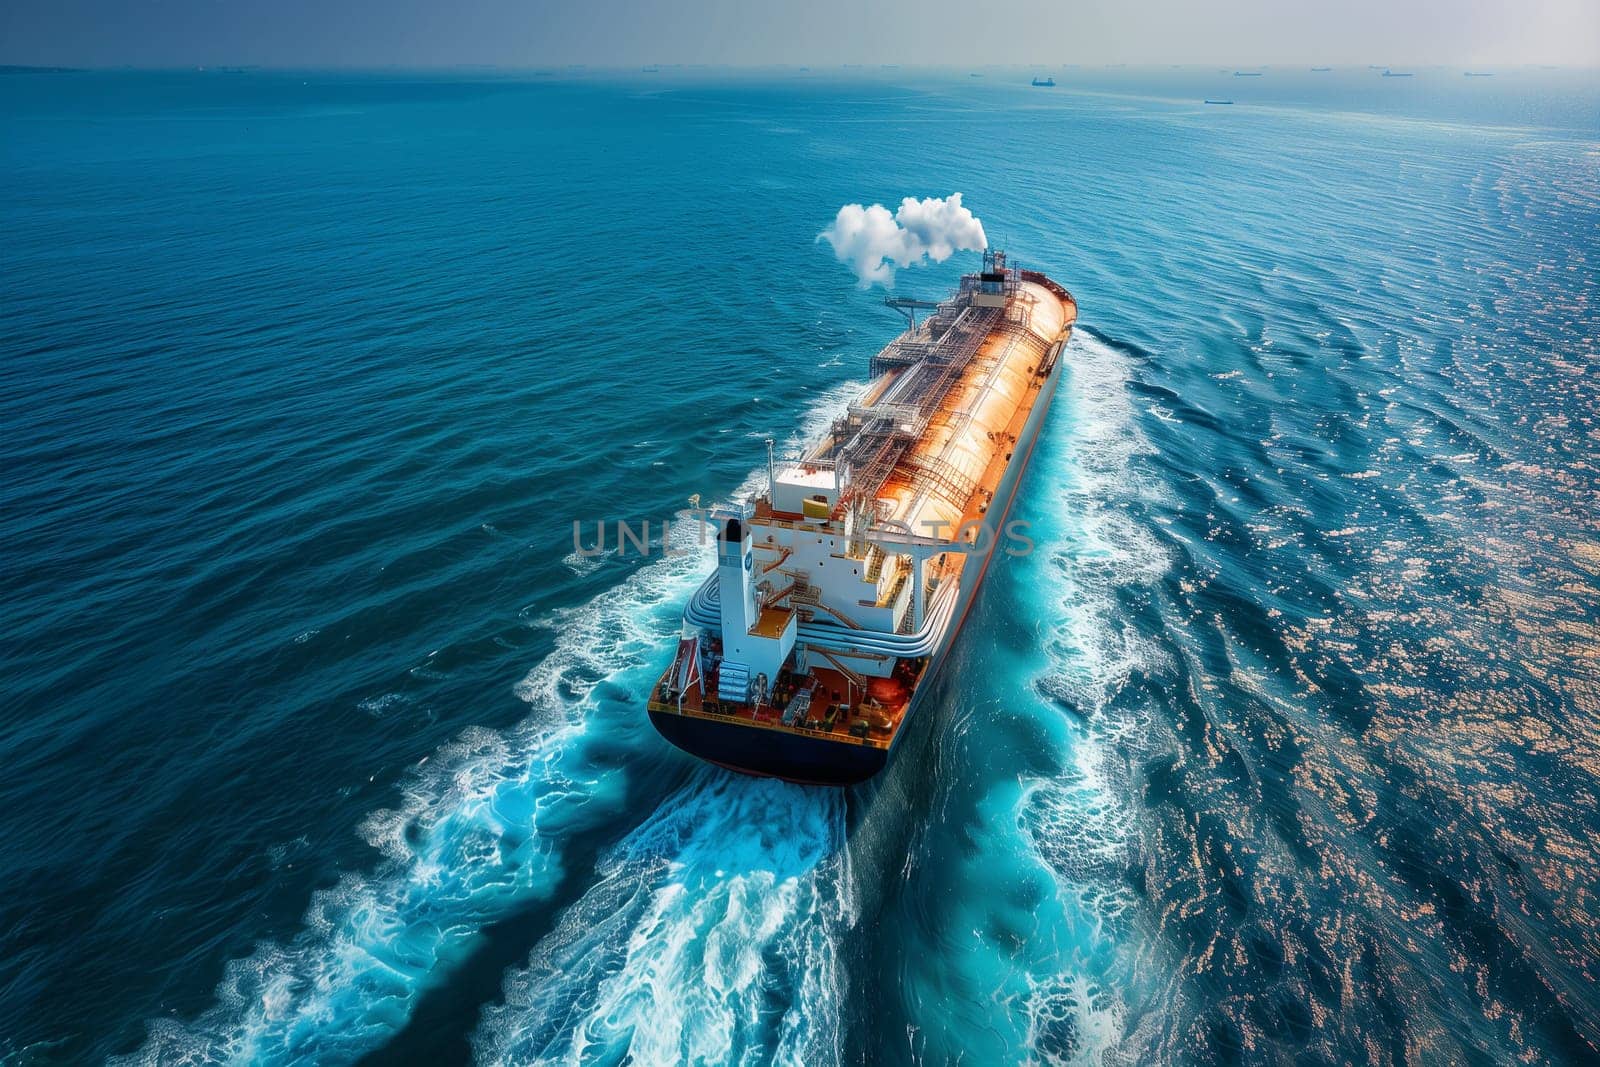 A large cargo tanker navigates the open waters of the ocean, transporting goods across the seas.